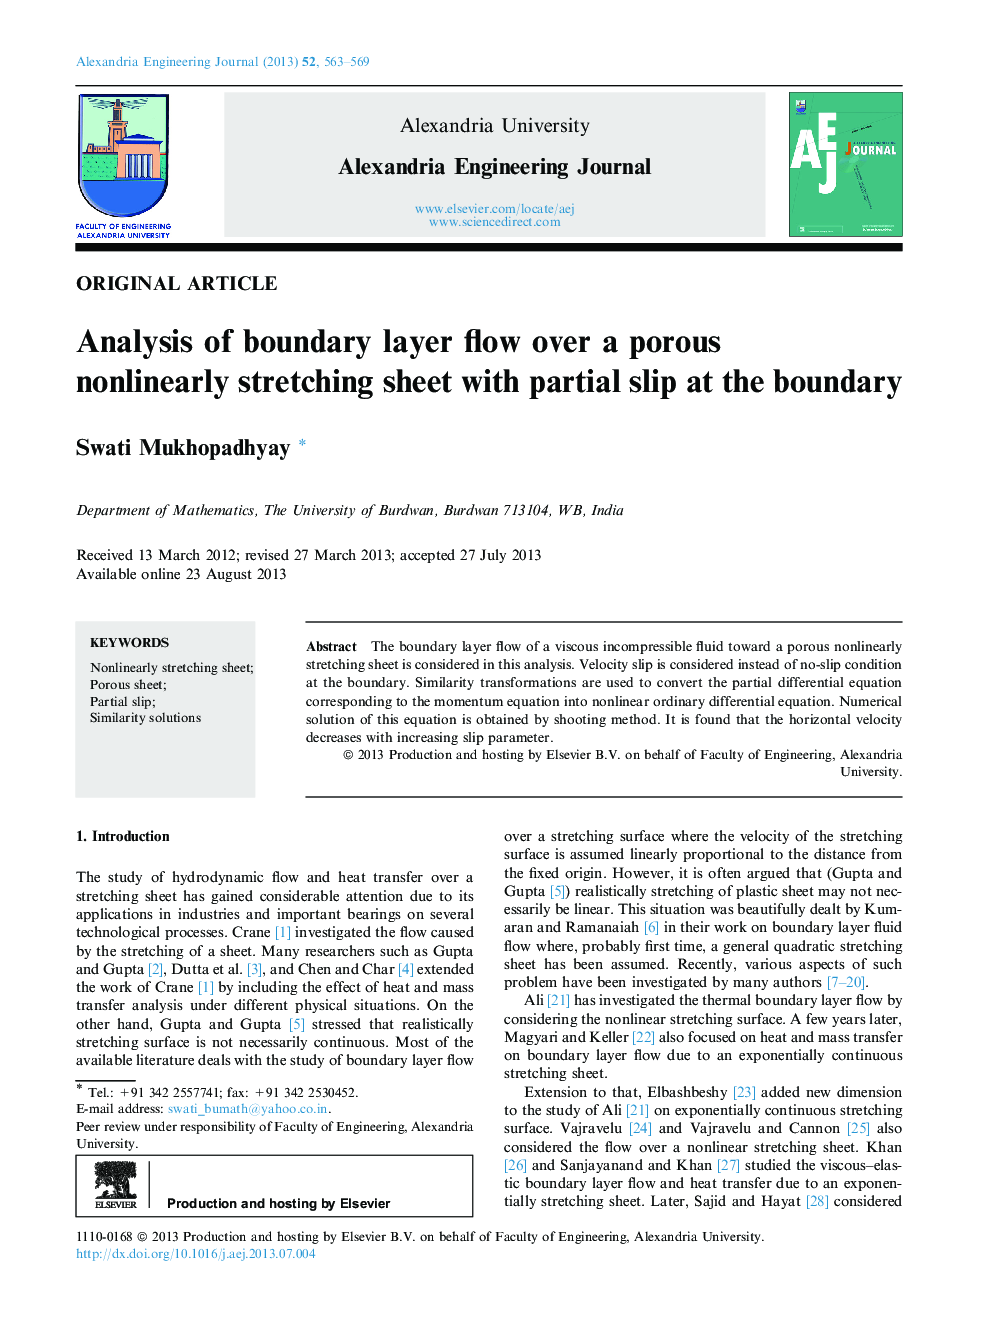 Analysis of boundary layer flow over a porous nonlinearly stretching sheet with partial slip at the boundary 